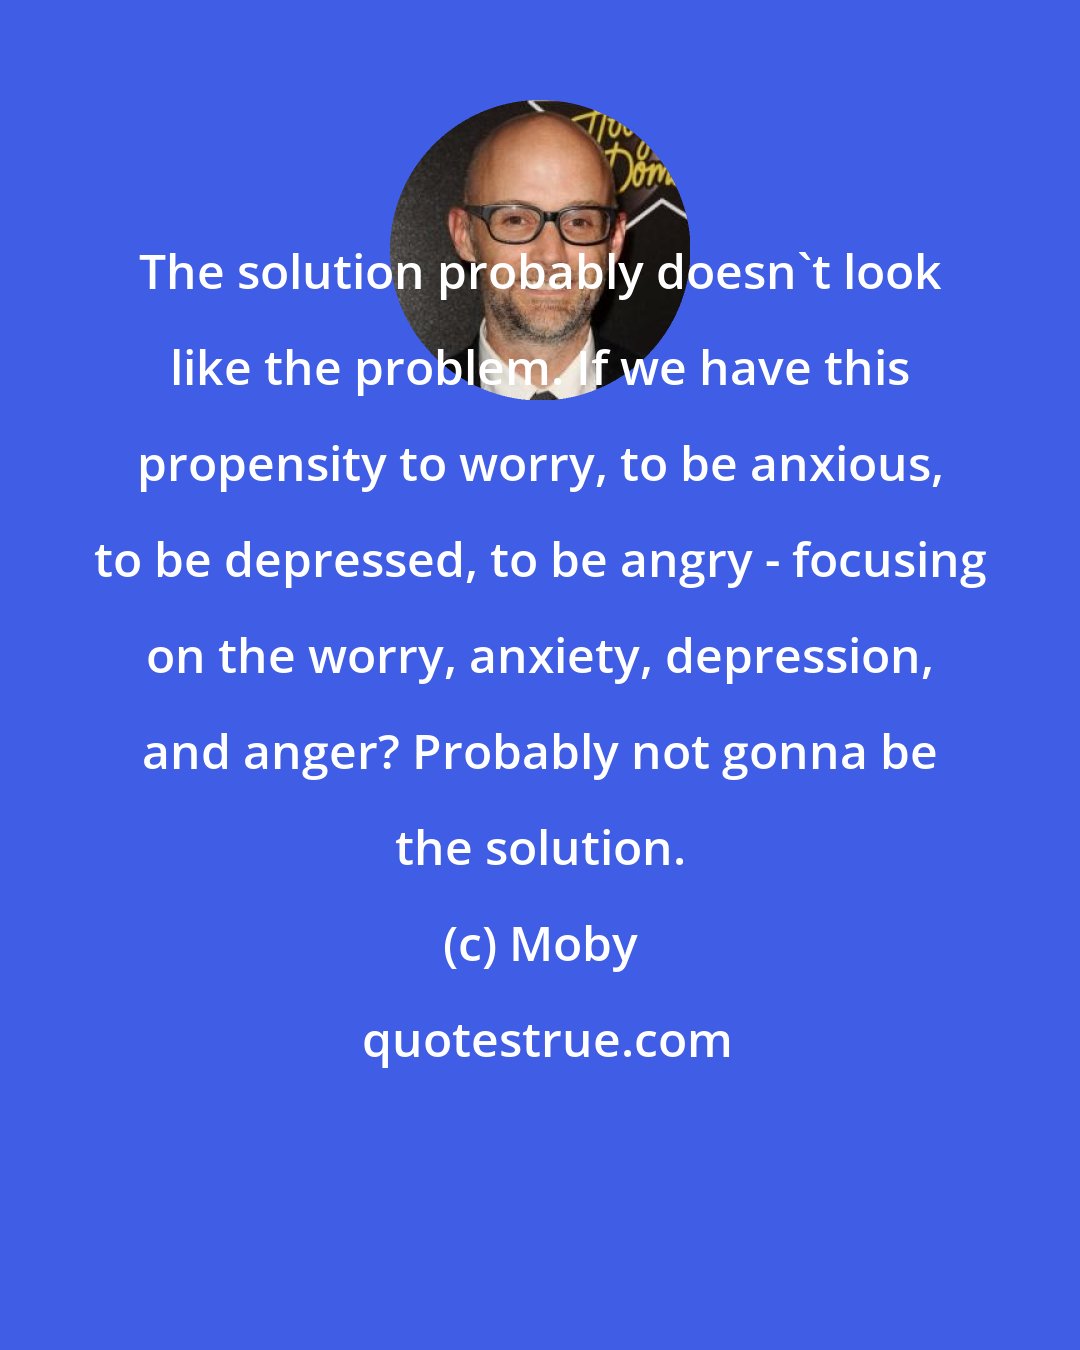 Moby: The solution probably doesn't look like the problem. If we have this propensity to worry, to be anxious, to be depressed, to be angry - focusing on the worry, anxiety, depression, and anger? Probably not gonna be the solution.